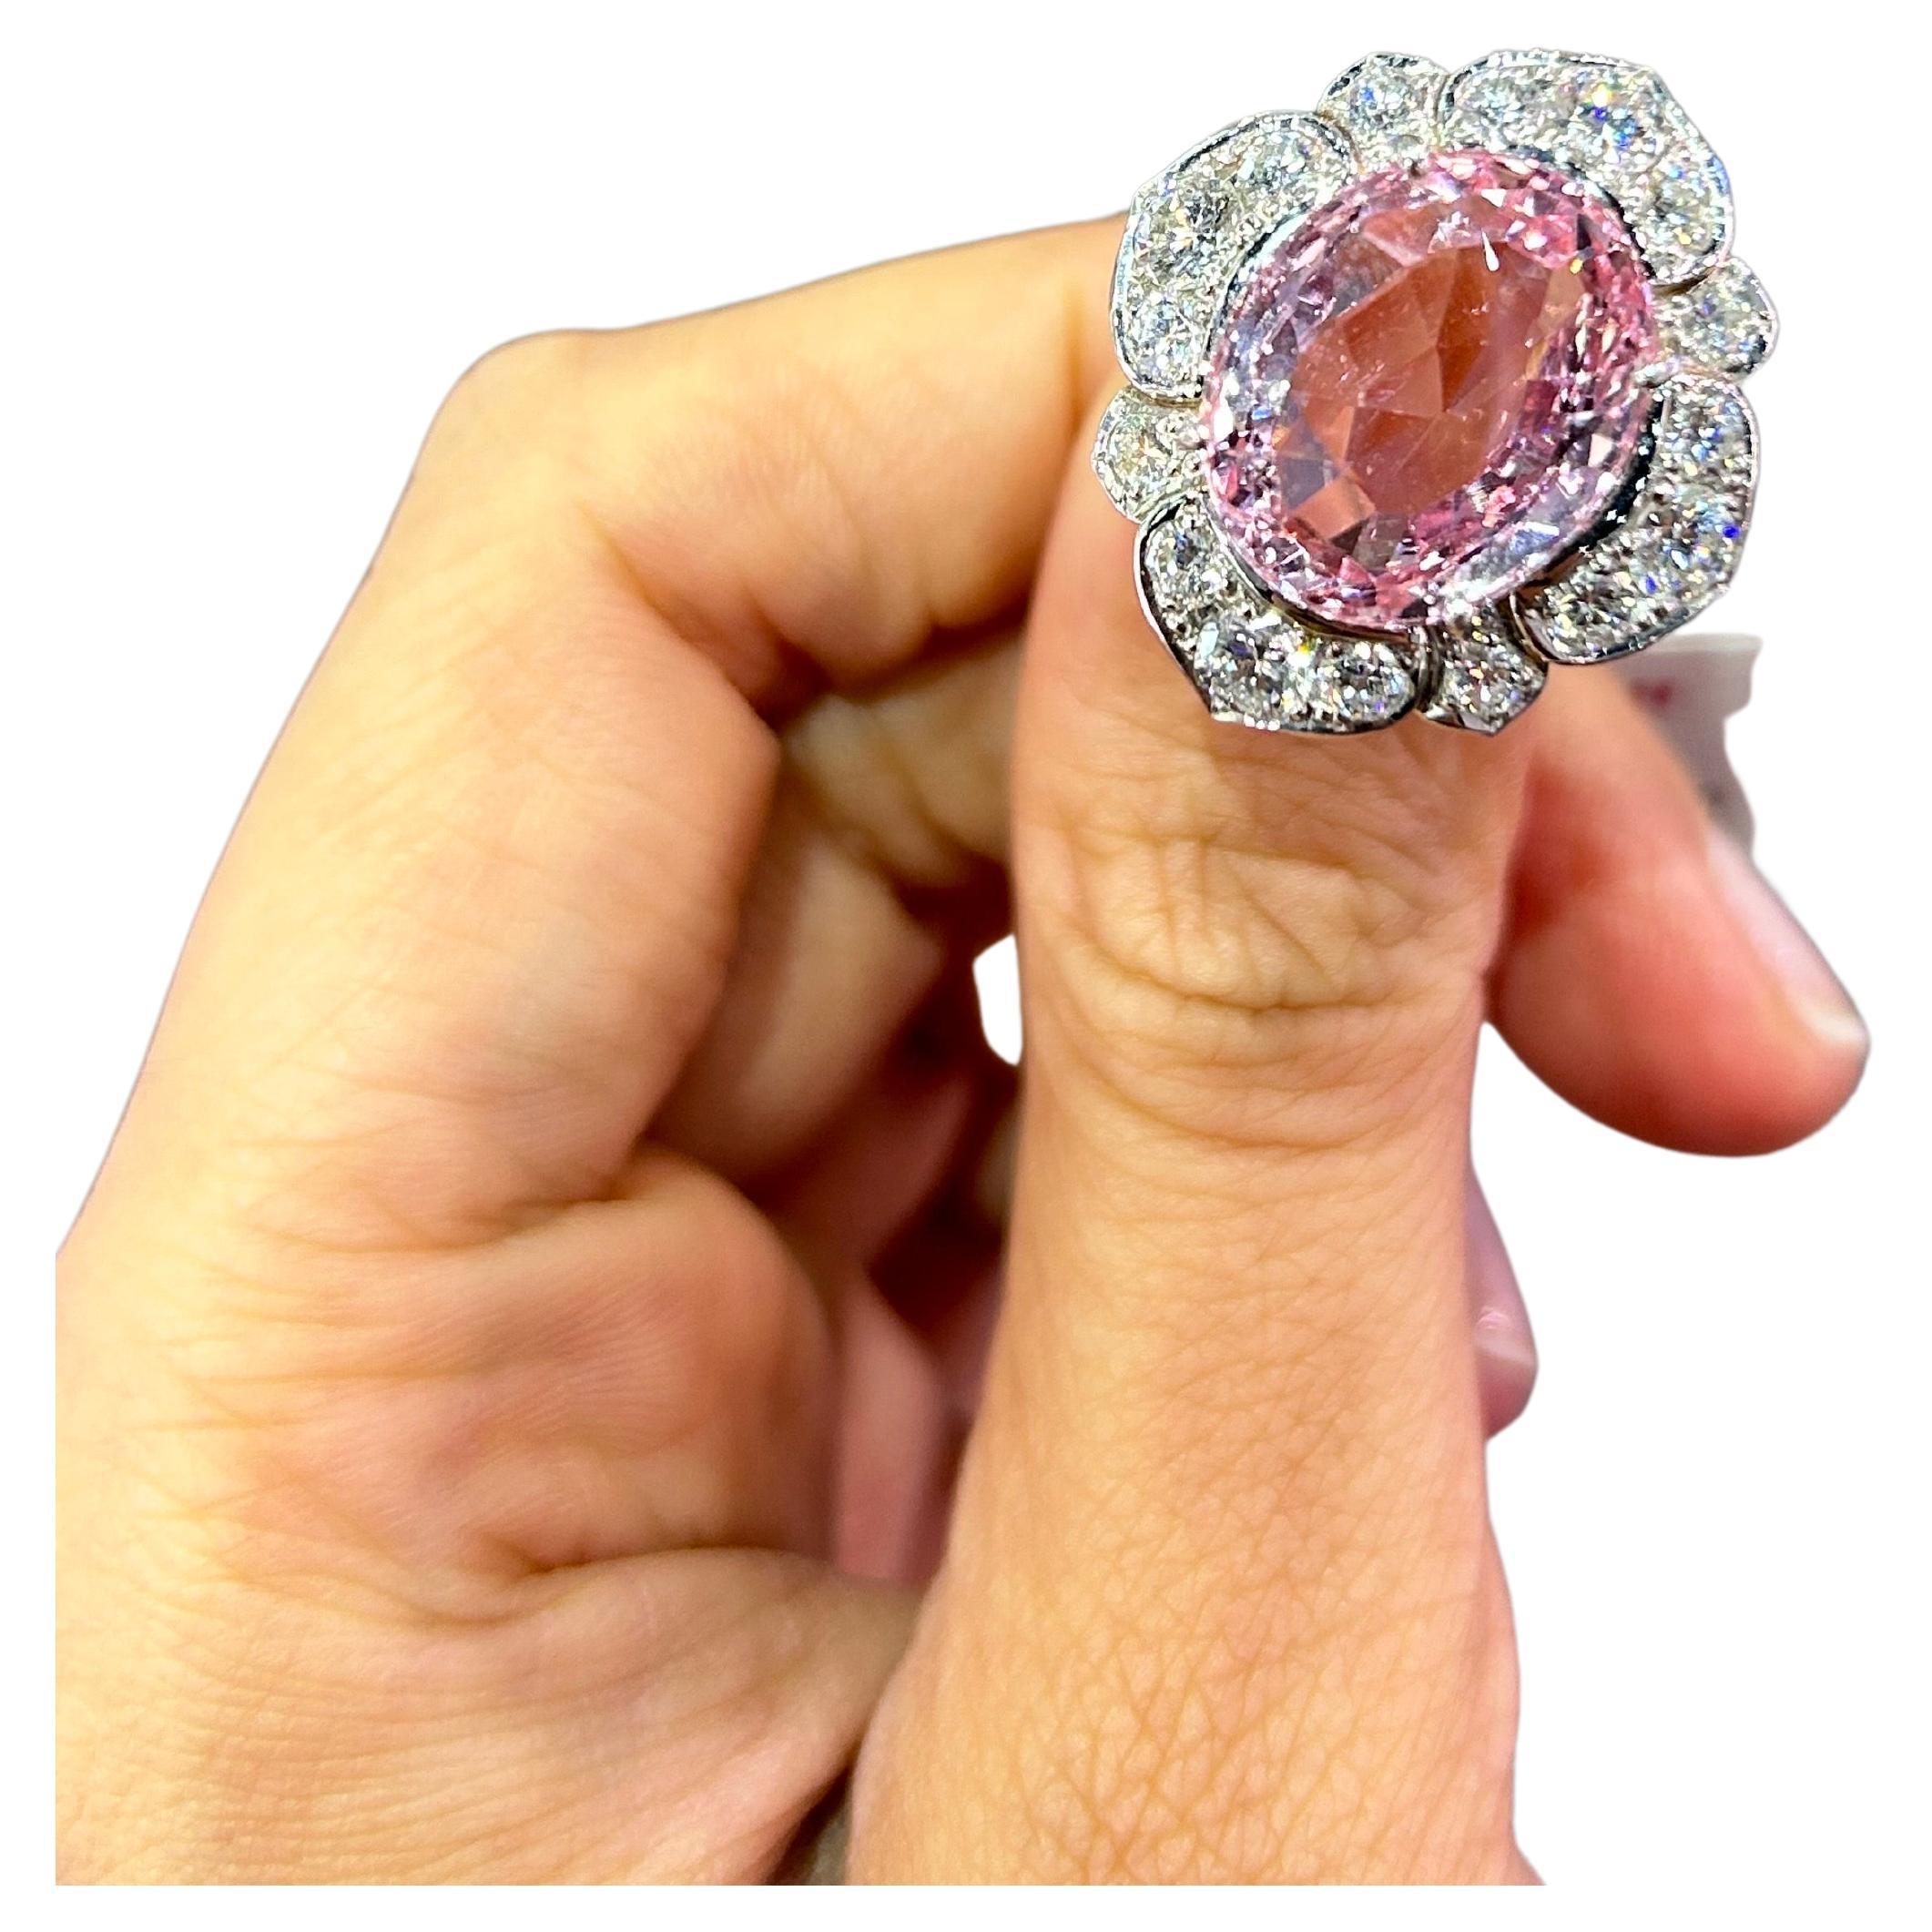 A one of a kind, natural oval shaped Padparadscha Sapphire cocktail ring, set elegantly with Diamonds. It is truly a collectors piece, as Padparadscha Sapphire are a rare find, especially of this large size. The ring is currently sized at US7, can